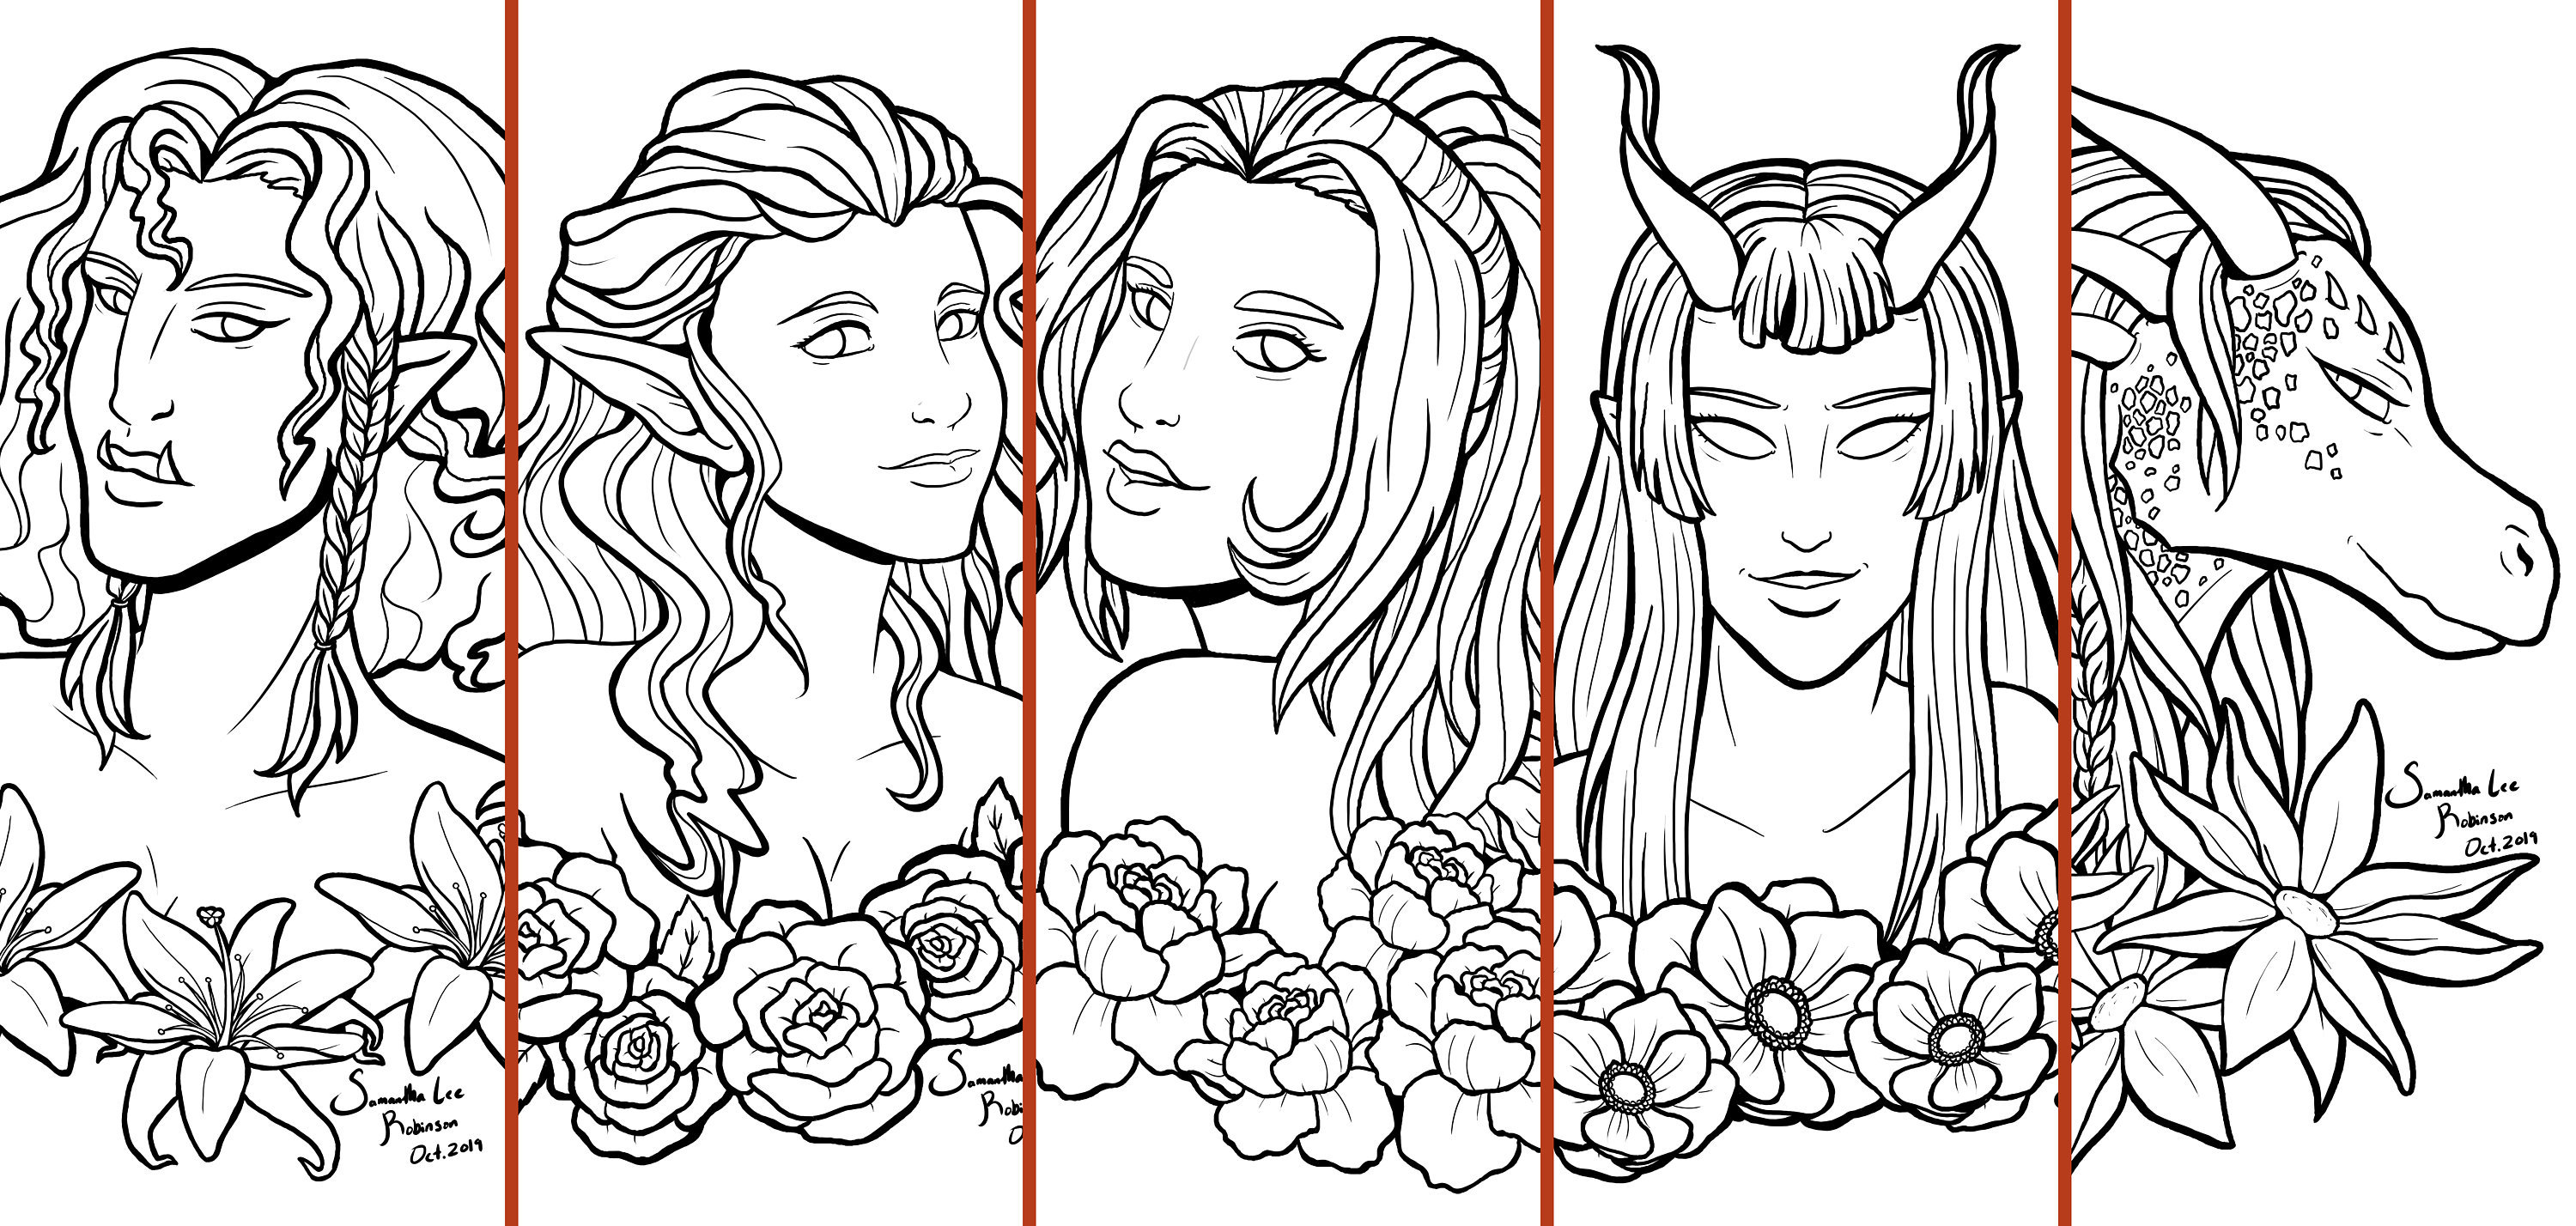 Dd ladies coloring pages download now